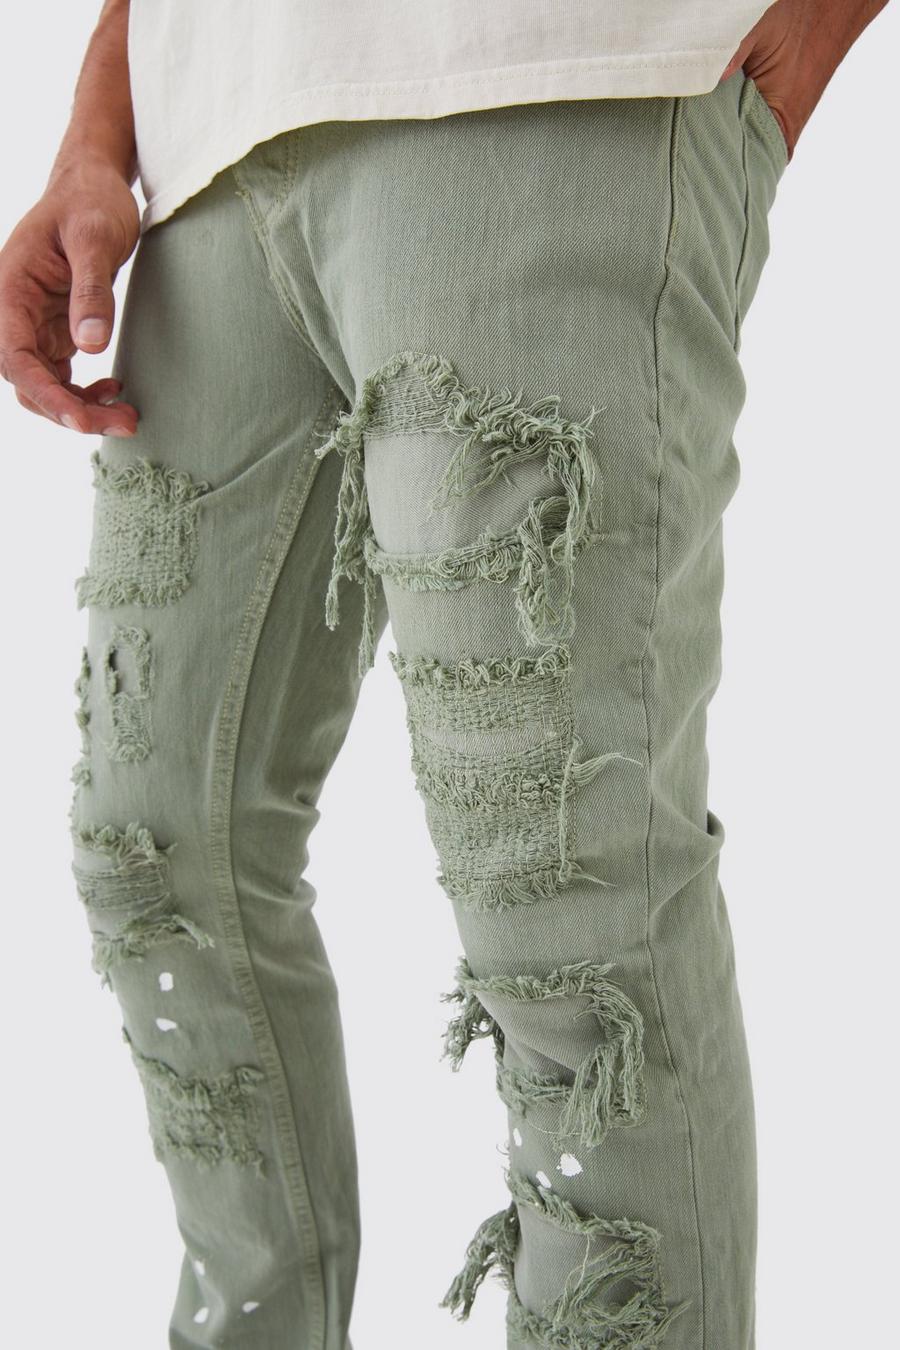 Boohoo Slim Flare 00 Brushed Cable Knit Joggers in Green